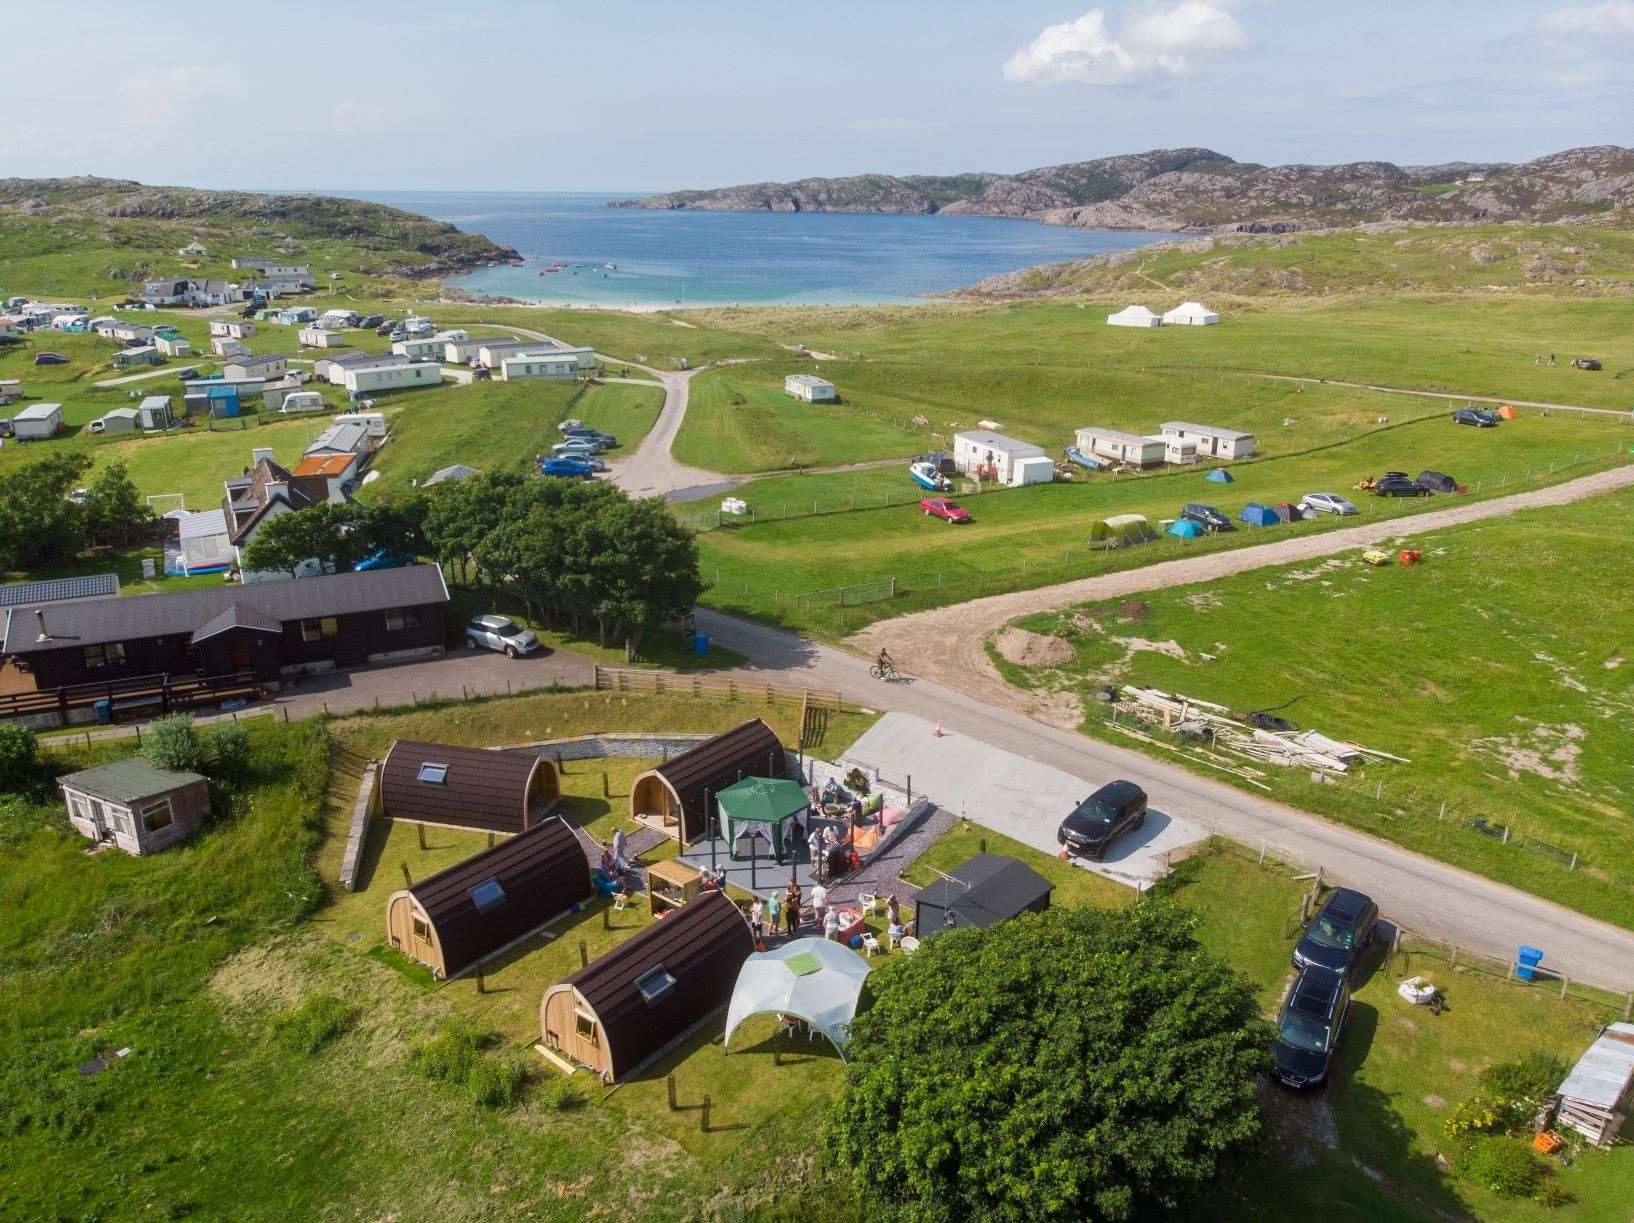 The site at Achmelvich is one of two run by NC500 Pods.